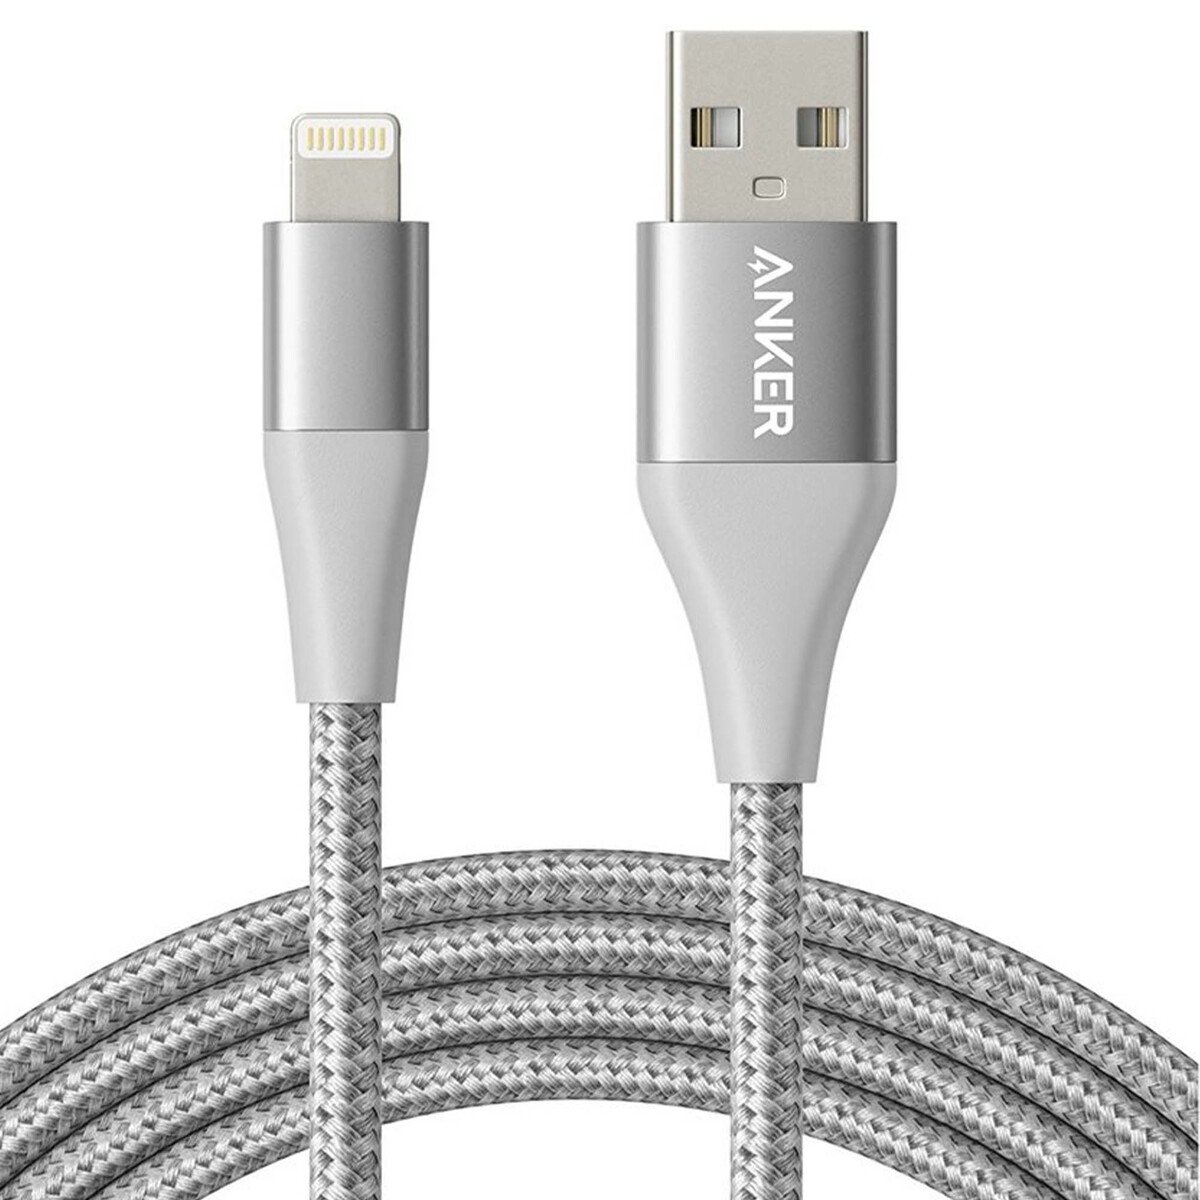 Anker PowerLine+ II with Lightning Cable A8452H41 Silver